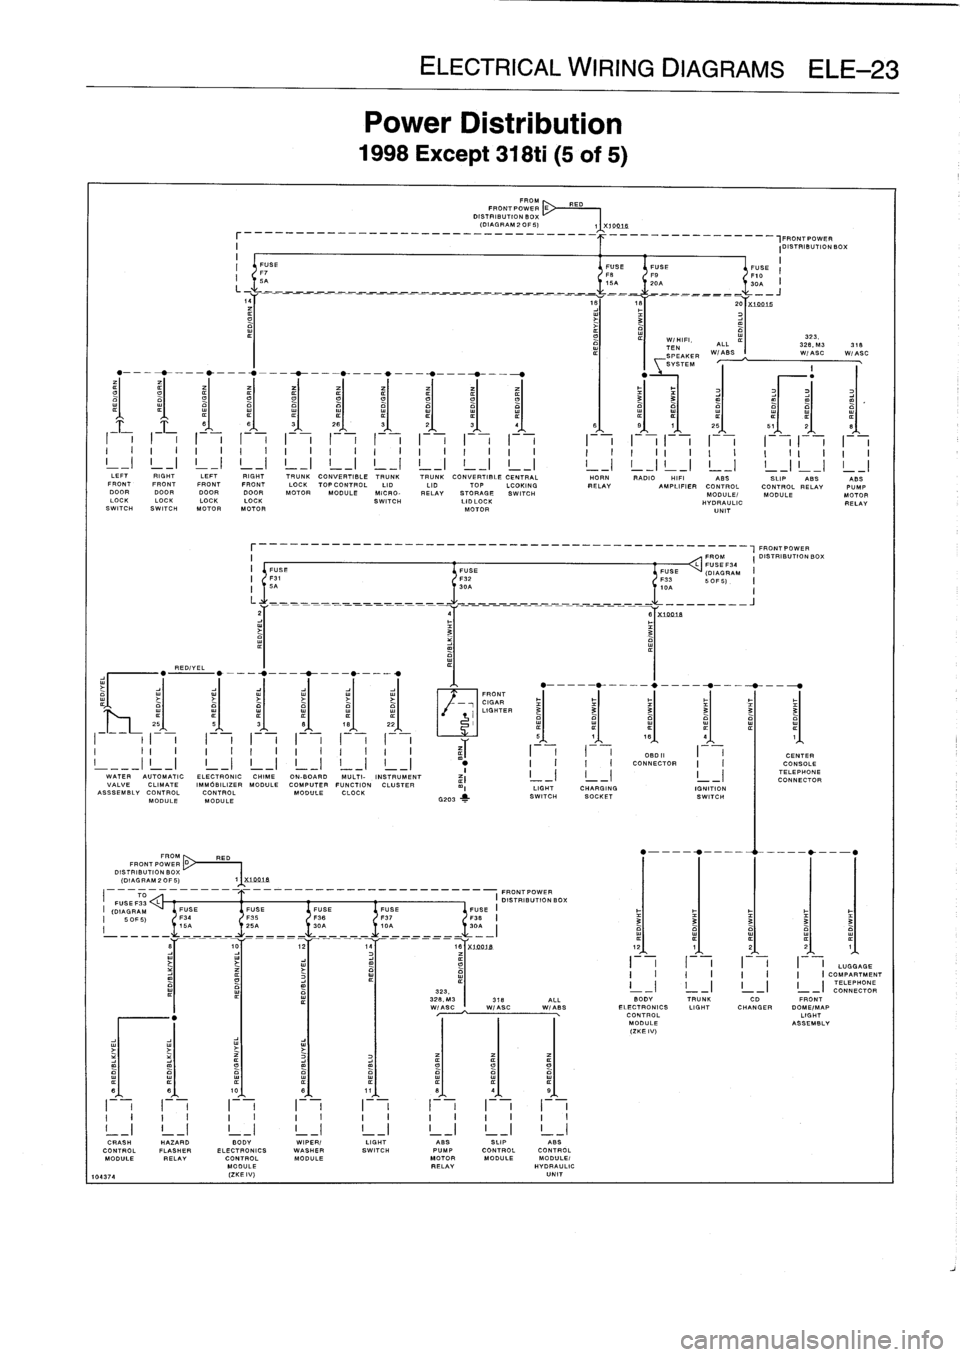 BMW 323i 1998 E36 Owners Guide 
REDIYEL

FROM
RED
FRONT
PO
WE
R
D~
DISTRIBUTION
BOX
(DIAGRAM
2
OF
5)

_
_
_
_
_
_
_
_
_
_
__
,FRONTPOWER
I

	

IDISTRIBUTIONBOX
I

	

II
FUSE

	

FUSEFUSE

	

FUSE
F7

	

FS

	

FO

	

F10
I
I
5A

	
